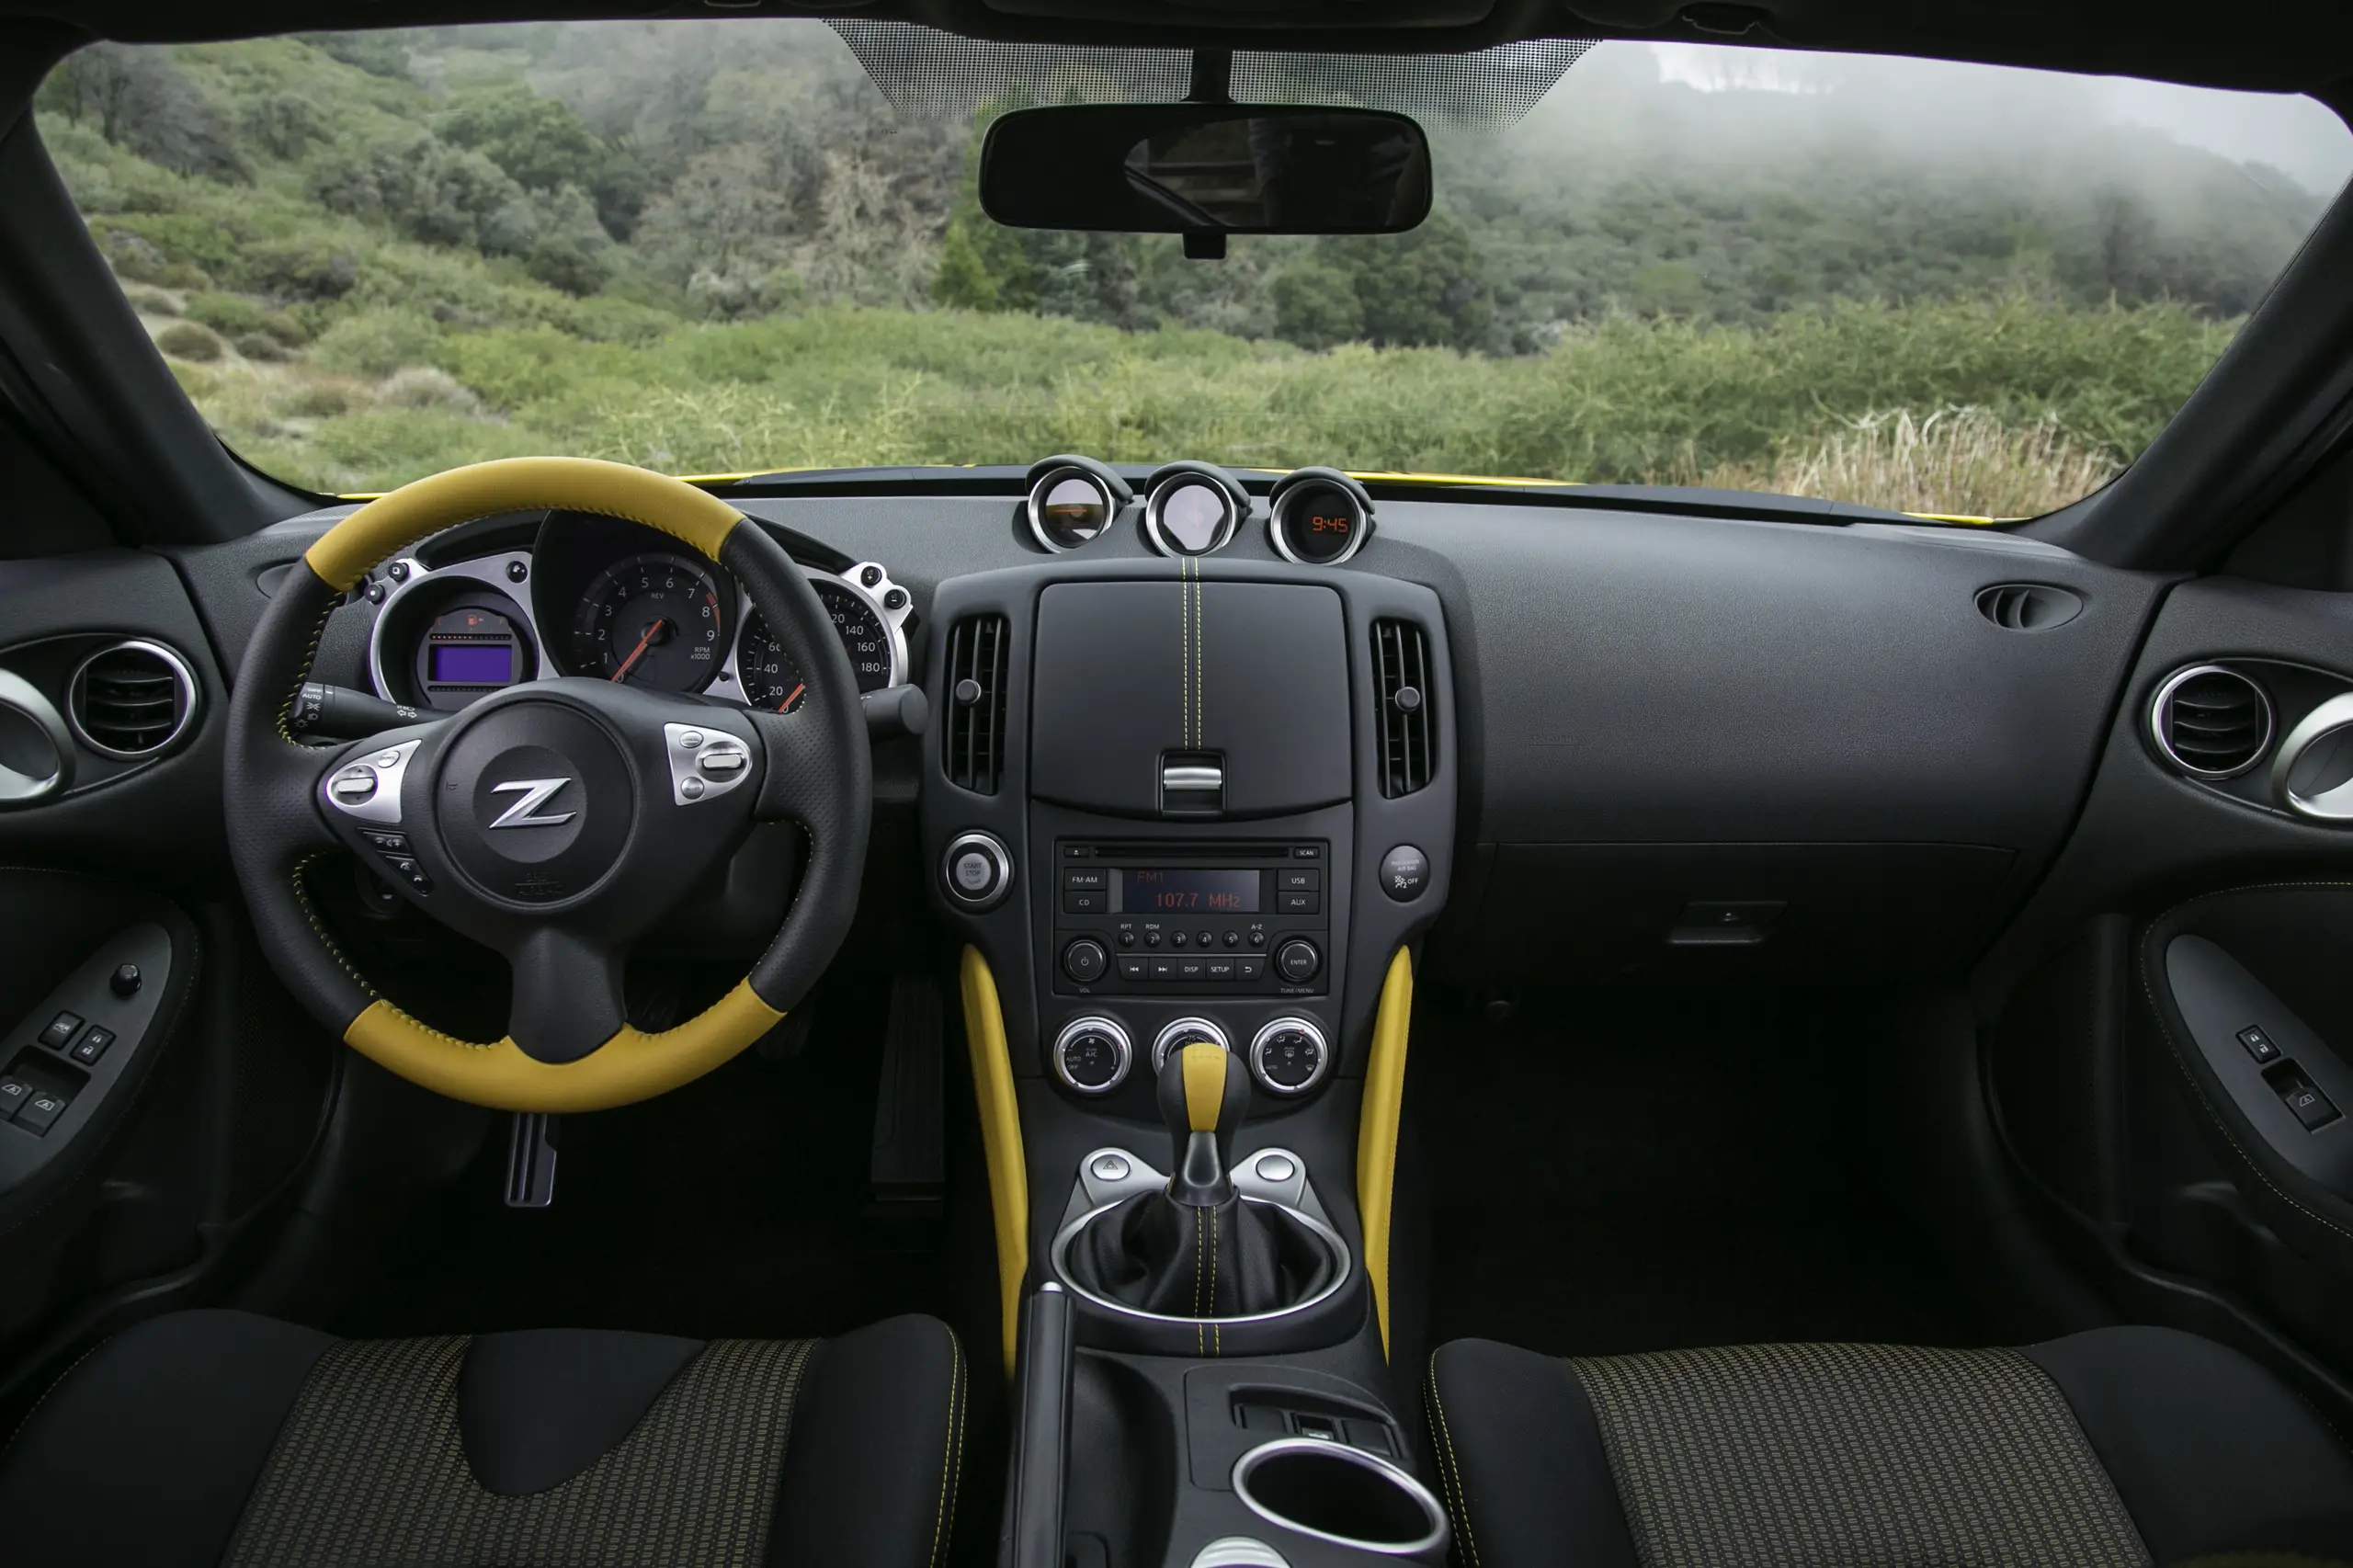 Nissan 370Z Heritage Edition 2018 interior front Dashboard view